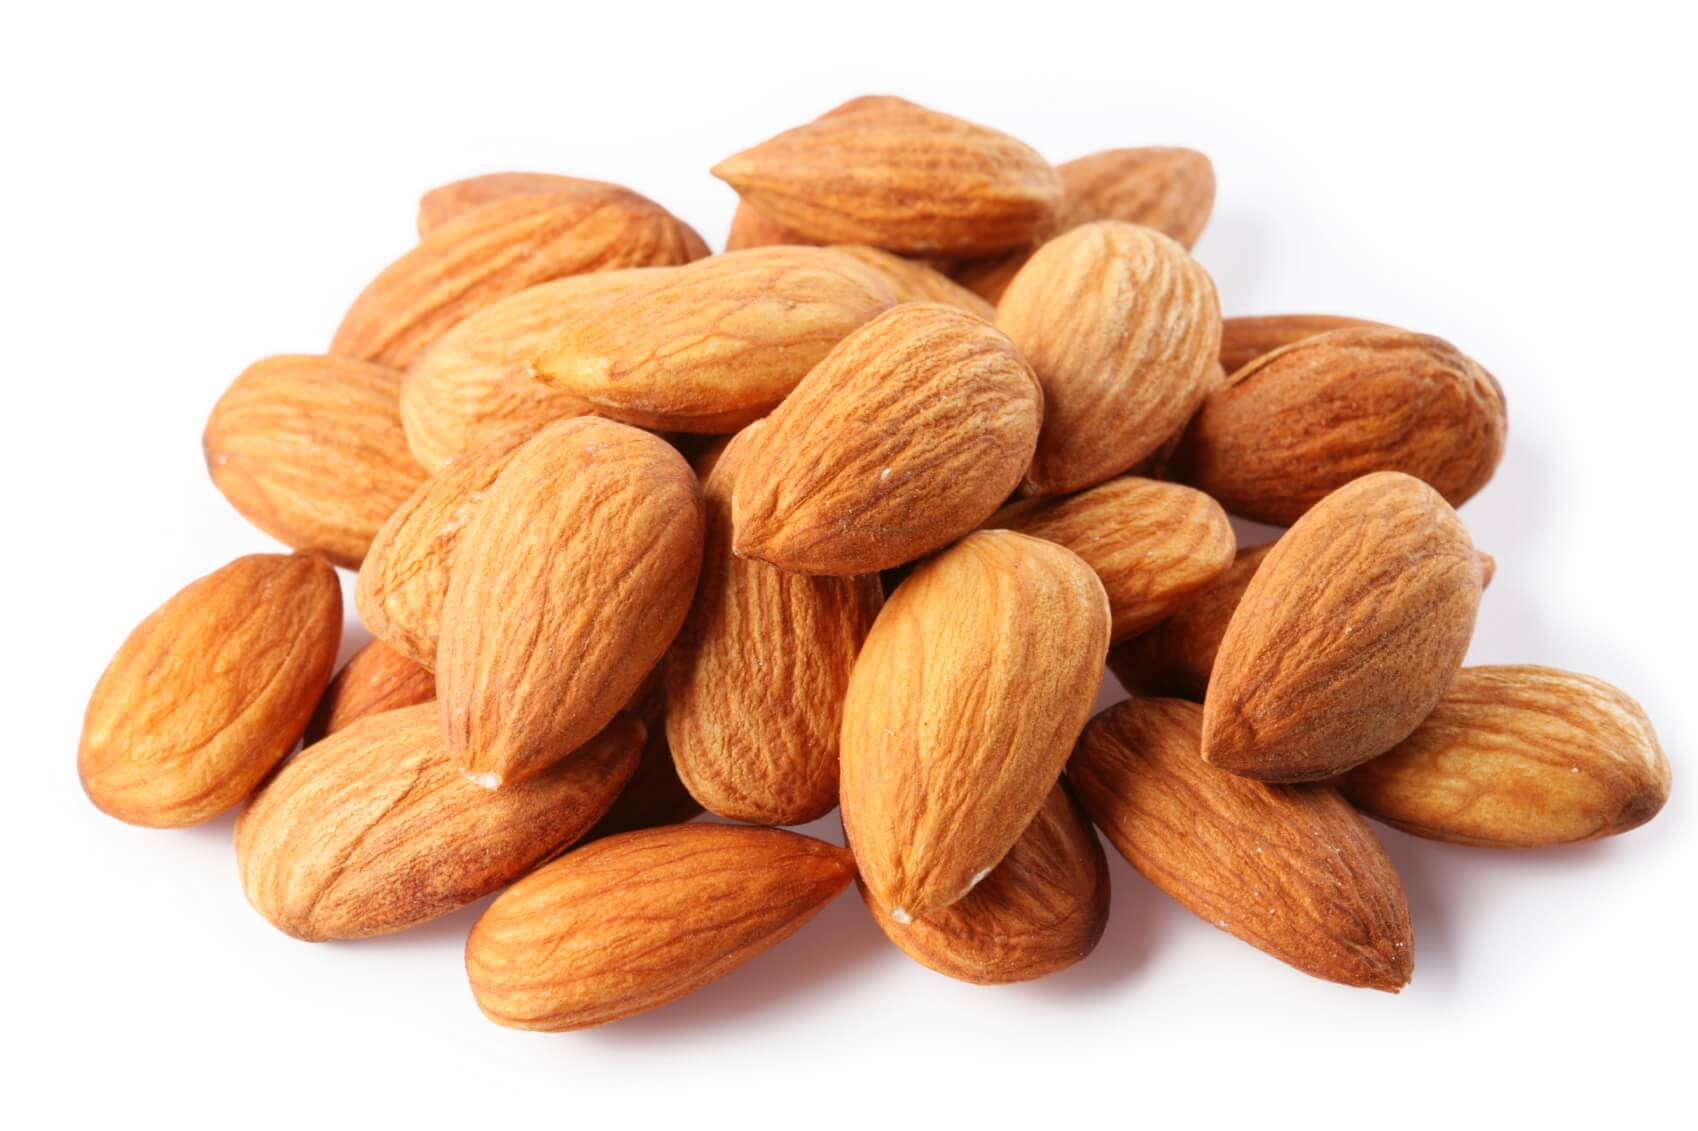 Your Ultimate Guide to Buying Almonds - The Best Quality Nuts Online